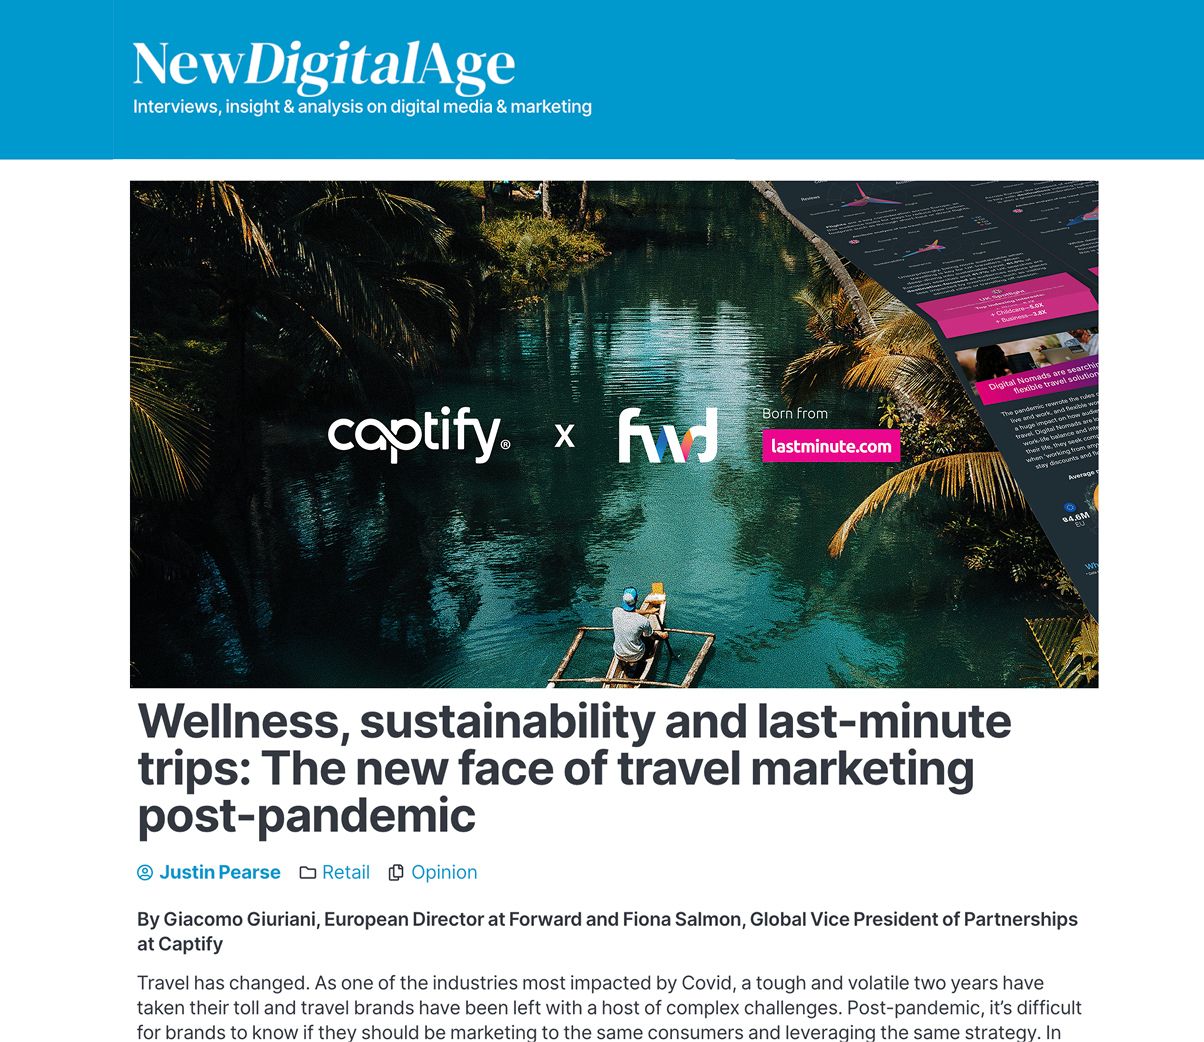 NewDigitalAge: Wellness, Sustainability and Last-minute Trips—The New Face of Travel Marketing Post-pandemic